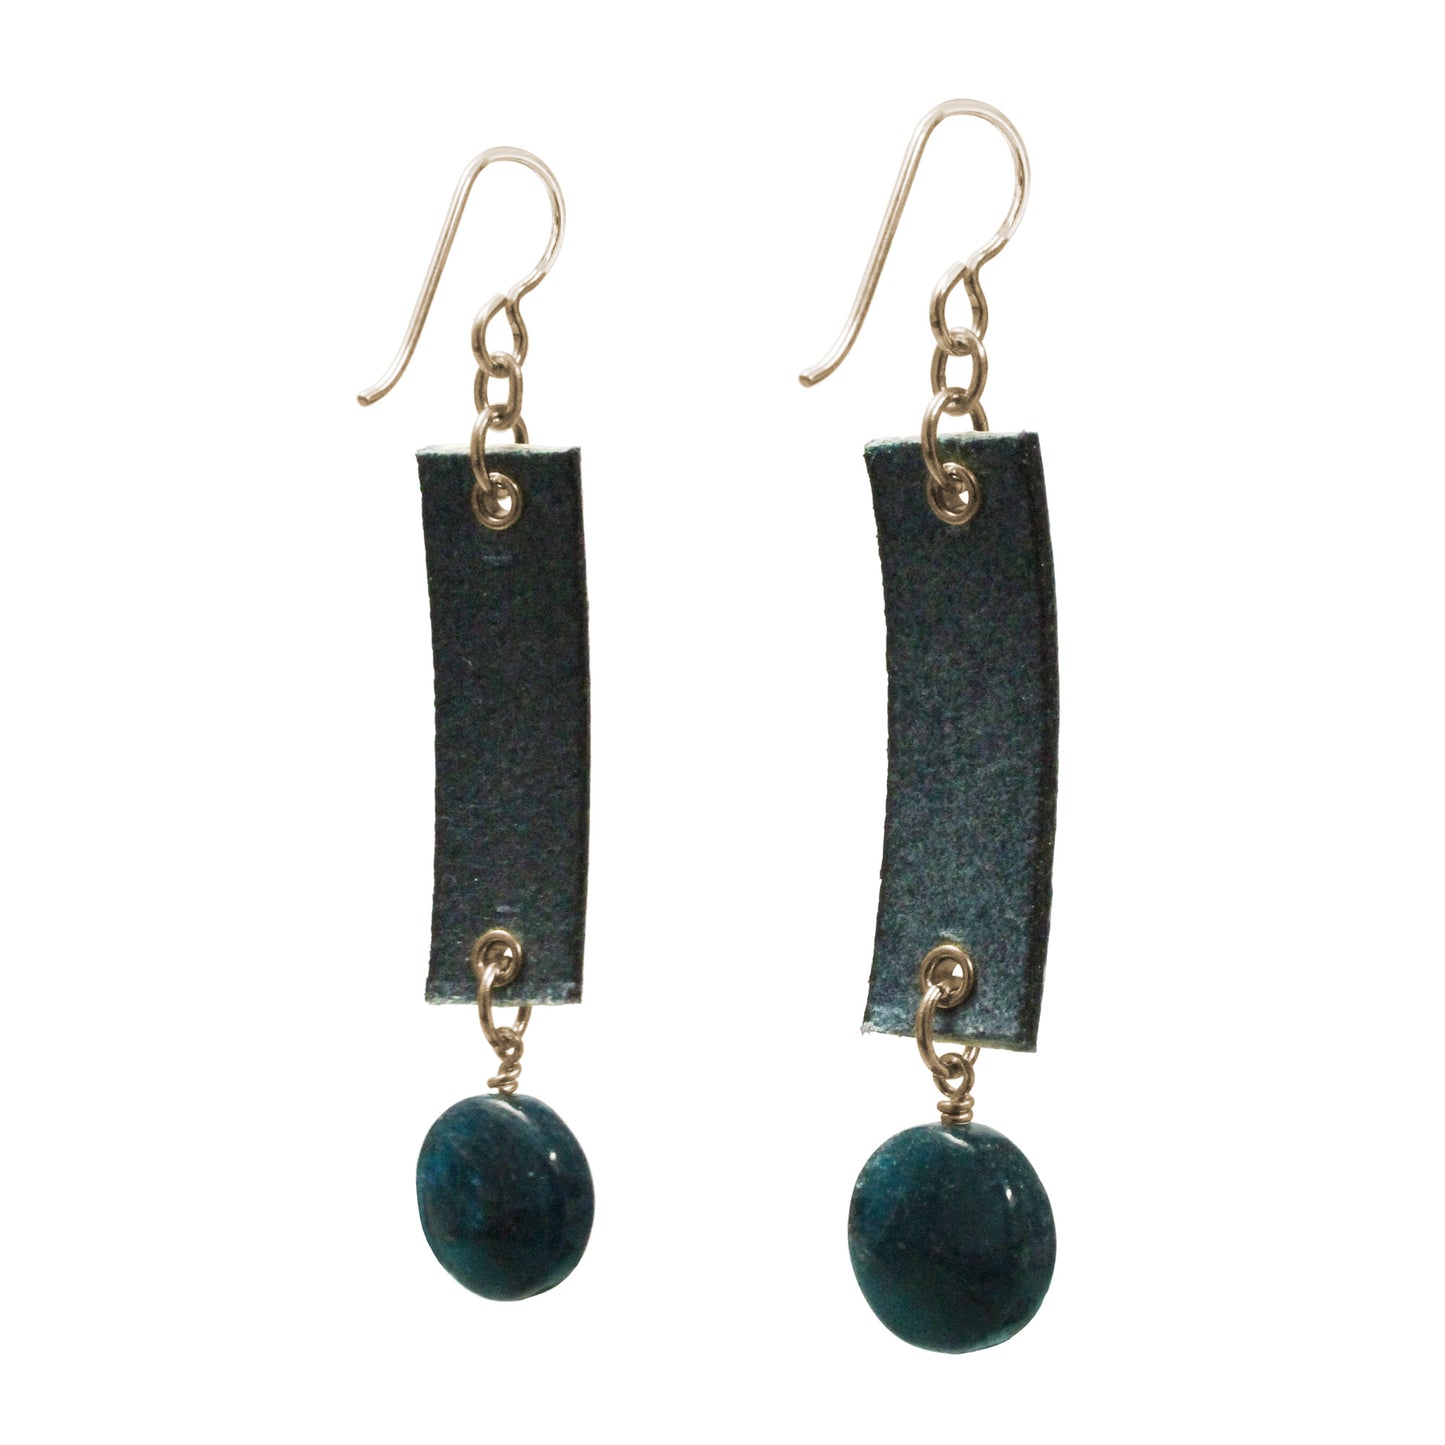 Blue Apatite Earrings / 65mm length / embossed floral leather / gold filled hook earwires